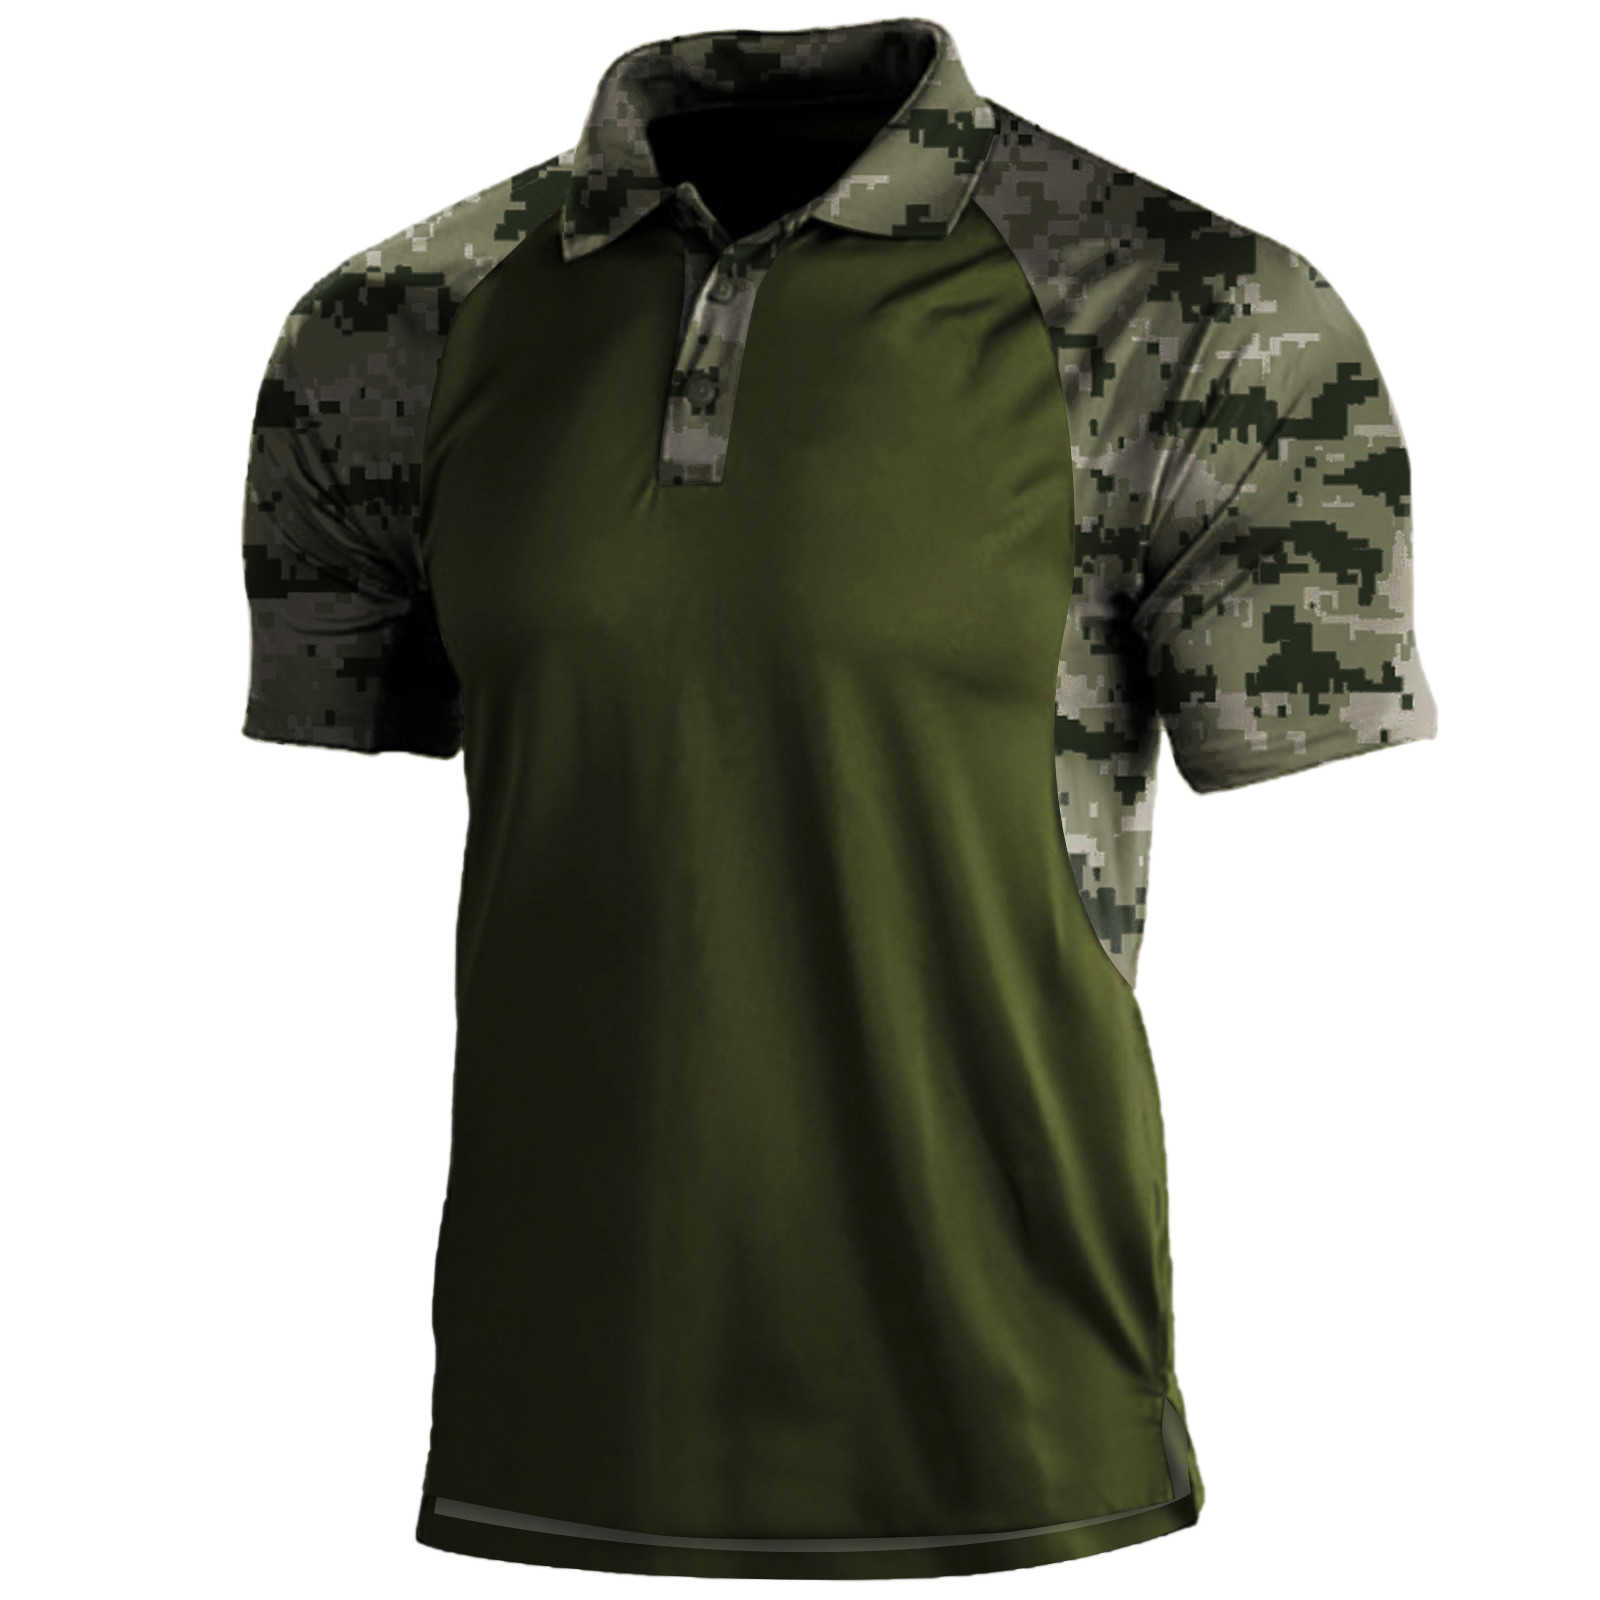 Men's T-Shirts Summer Military Tactical T Shirts Men Quick Dry Outdoor Nature Hike Shirt Short Sleeve Combat Climbing Camouflaged Clothing 2022 W0322